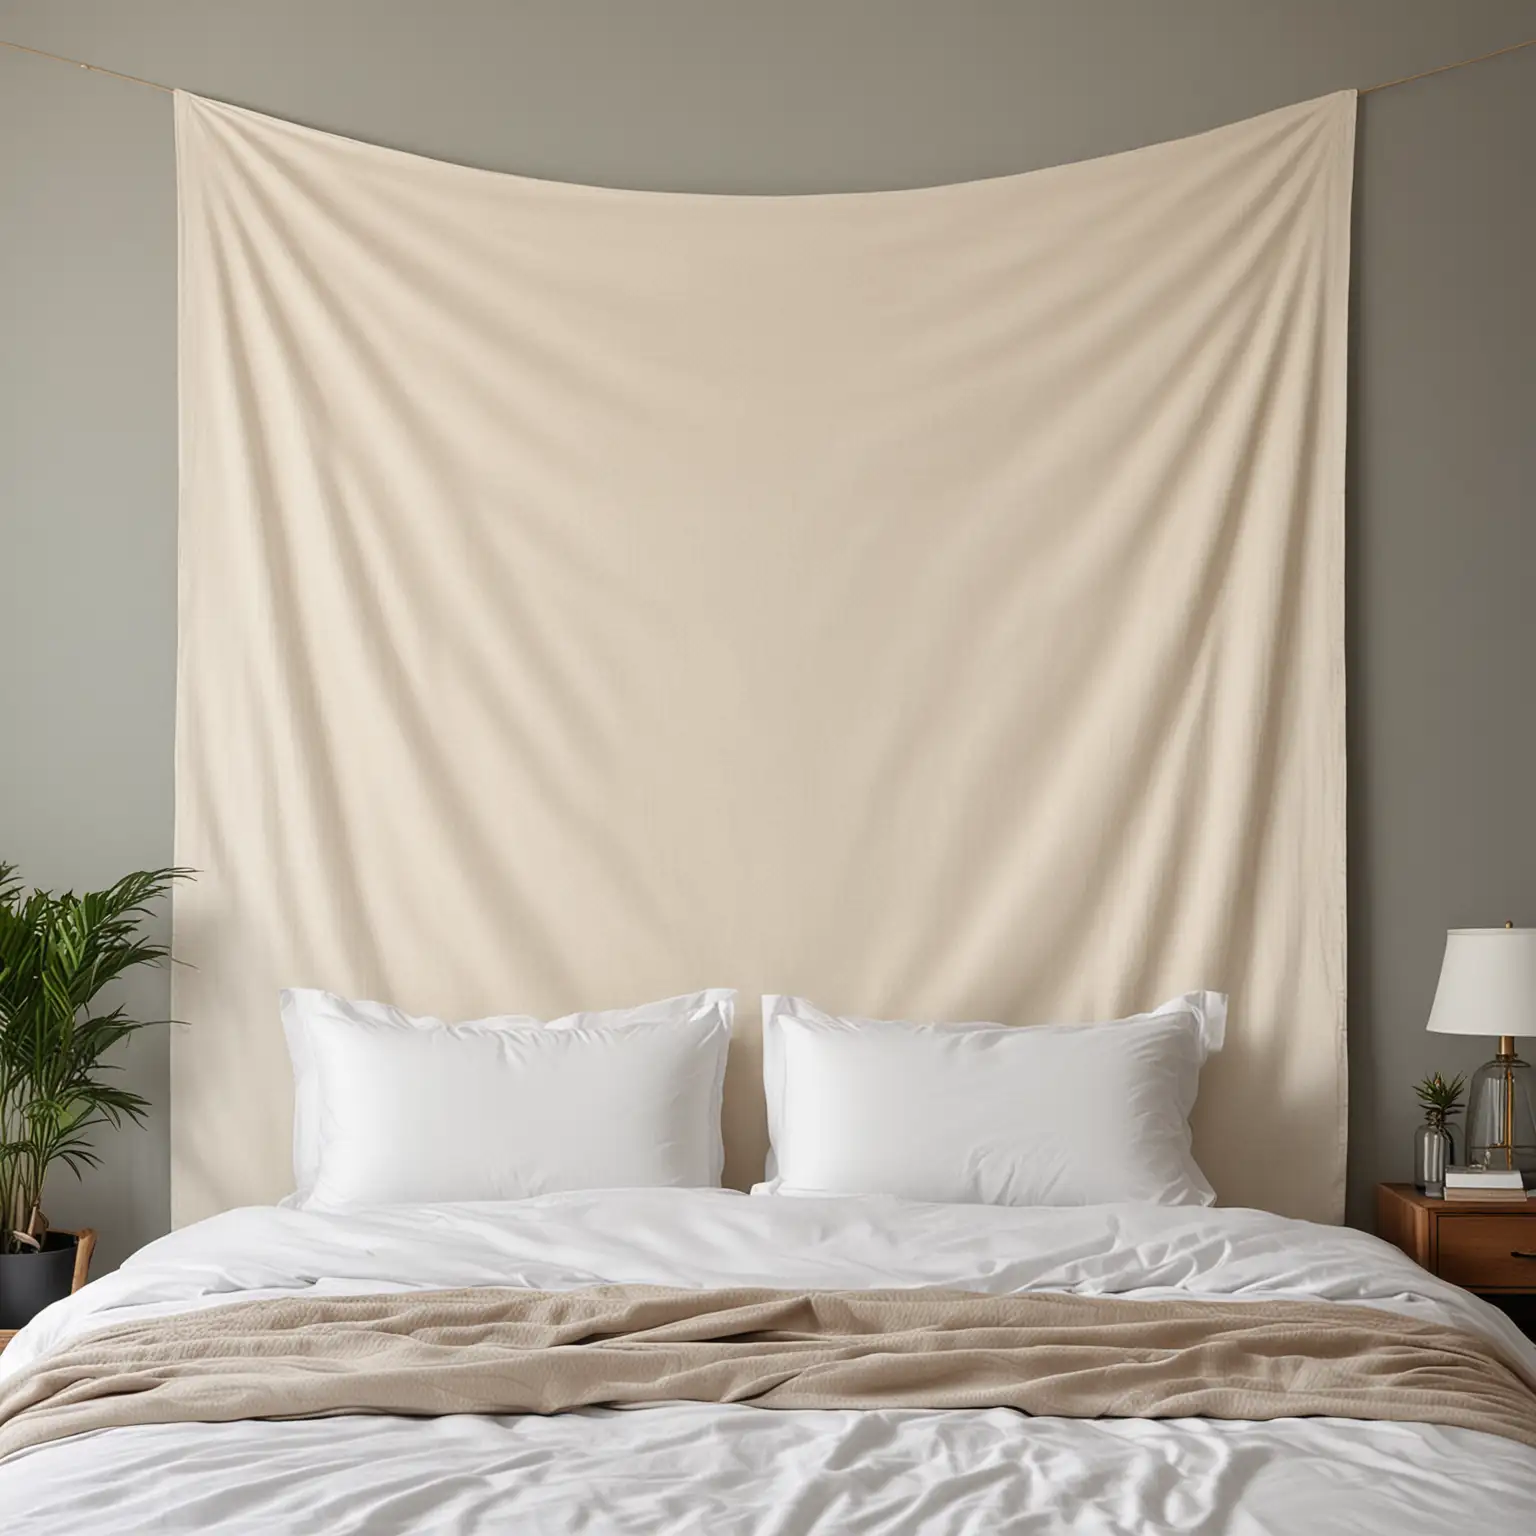 Minimalist Bedroom Wall Decor with White Tapestry Over Queen Size Bed